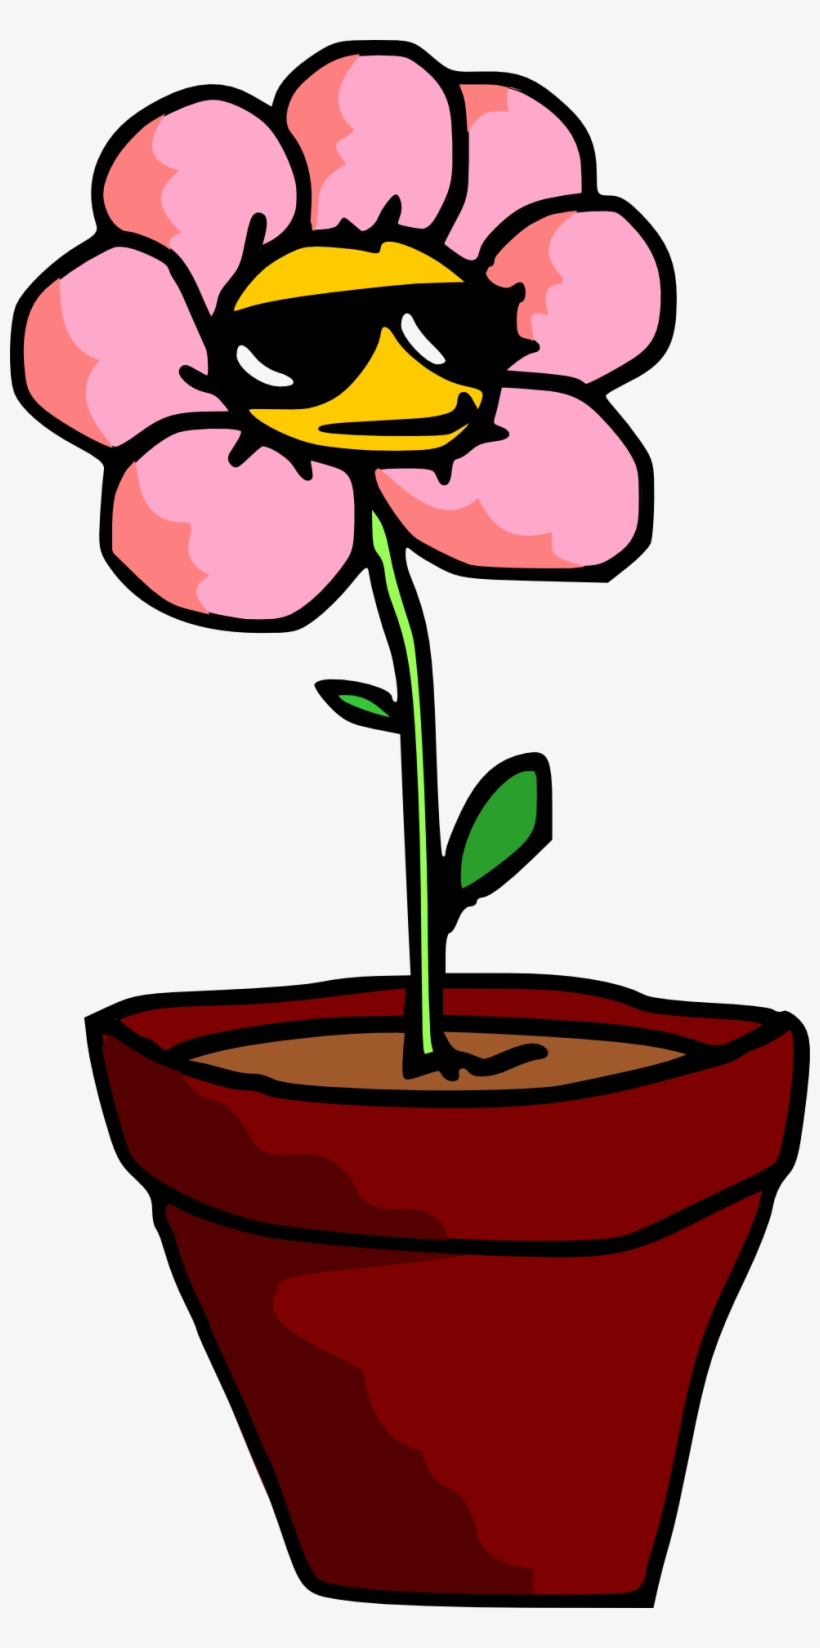 Potted Plants And Flowers Png - Plants With Sunglasses Cartoon, transparent png #730954